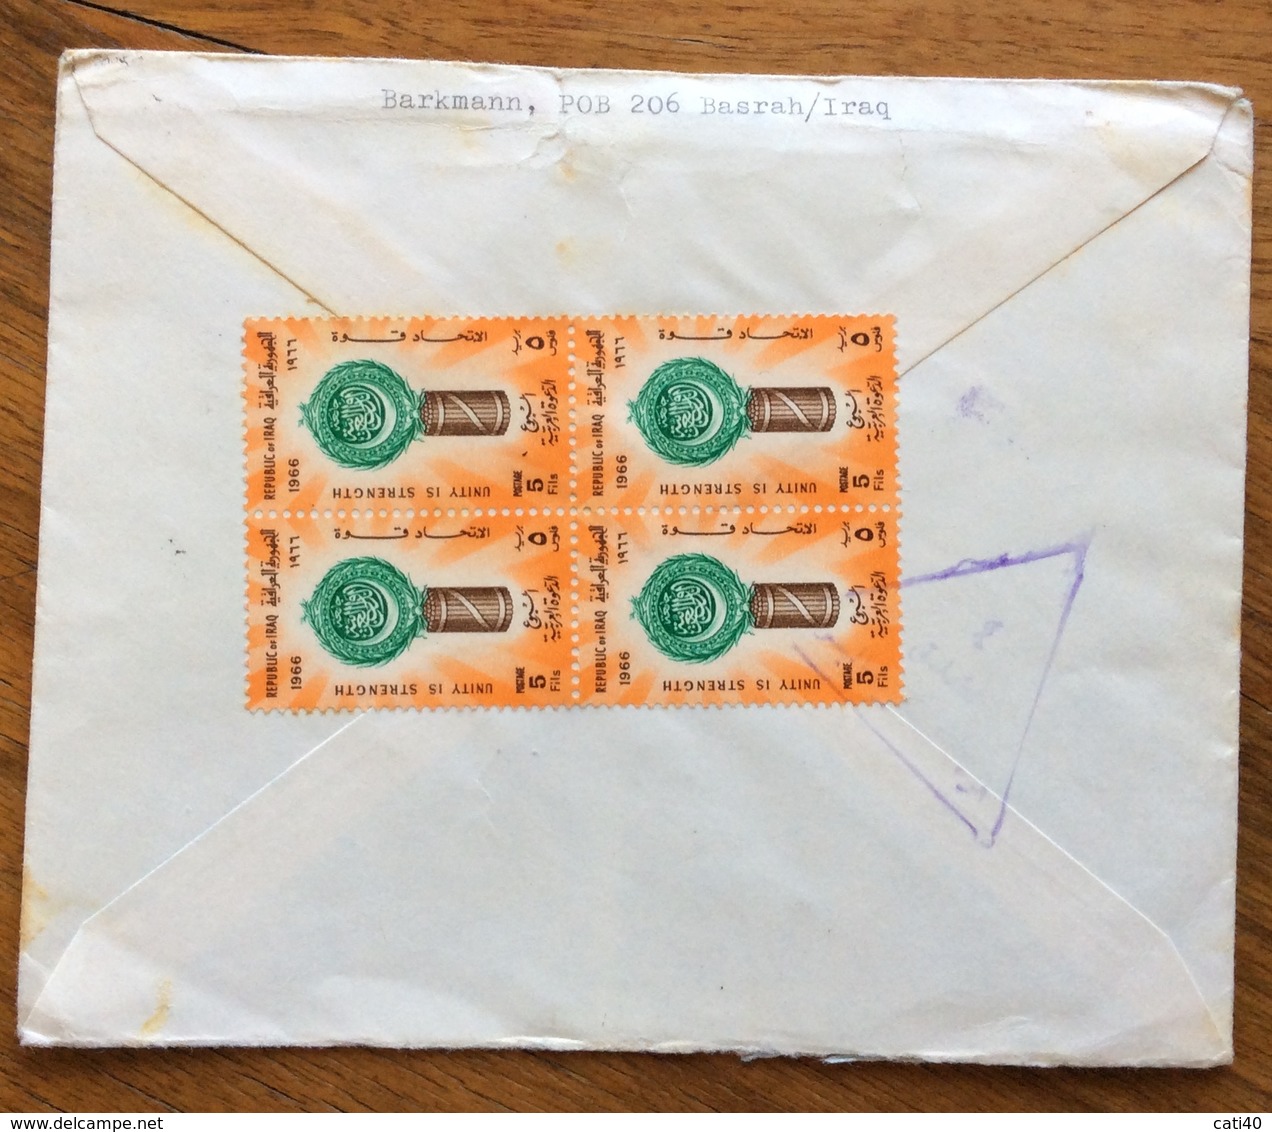 IRAQ  ENVELOPE COVER PAR AVION   FROM BASRAH  TO  CLEVELAND  U.S.A.   1966 - Iraq